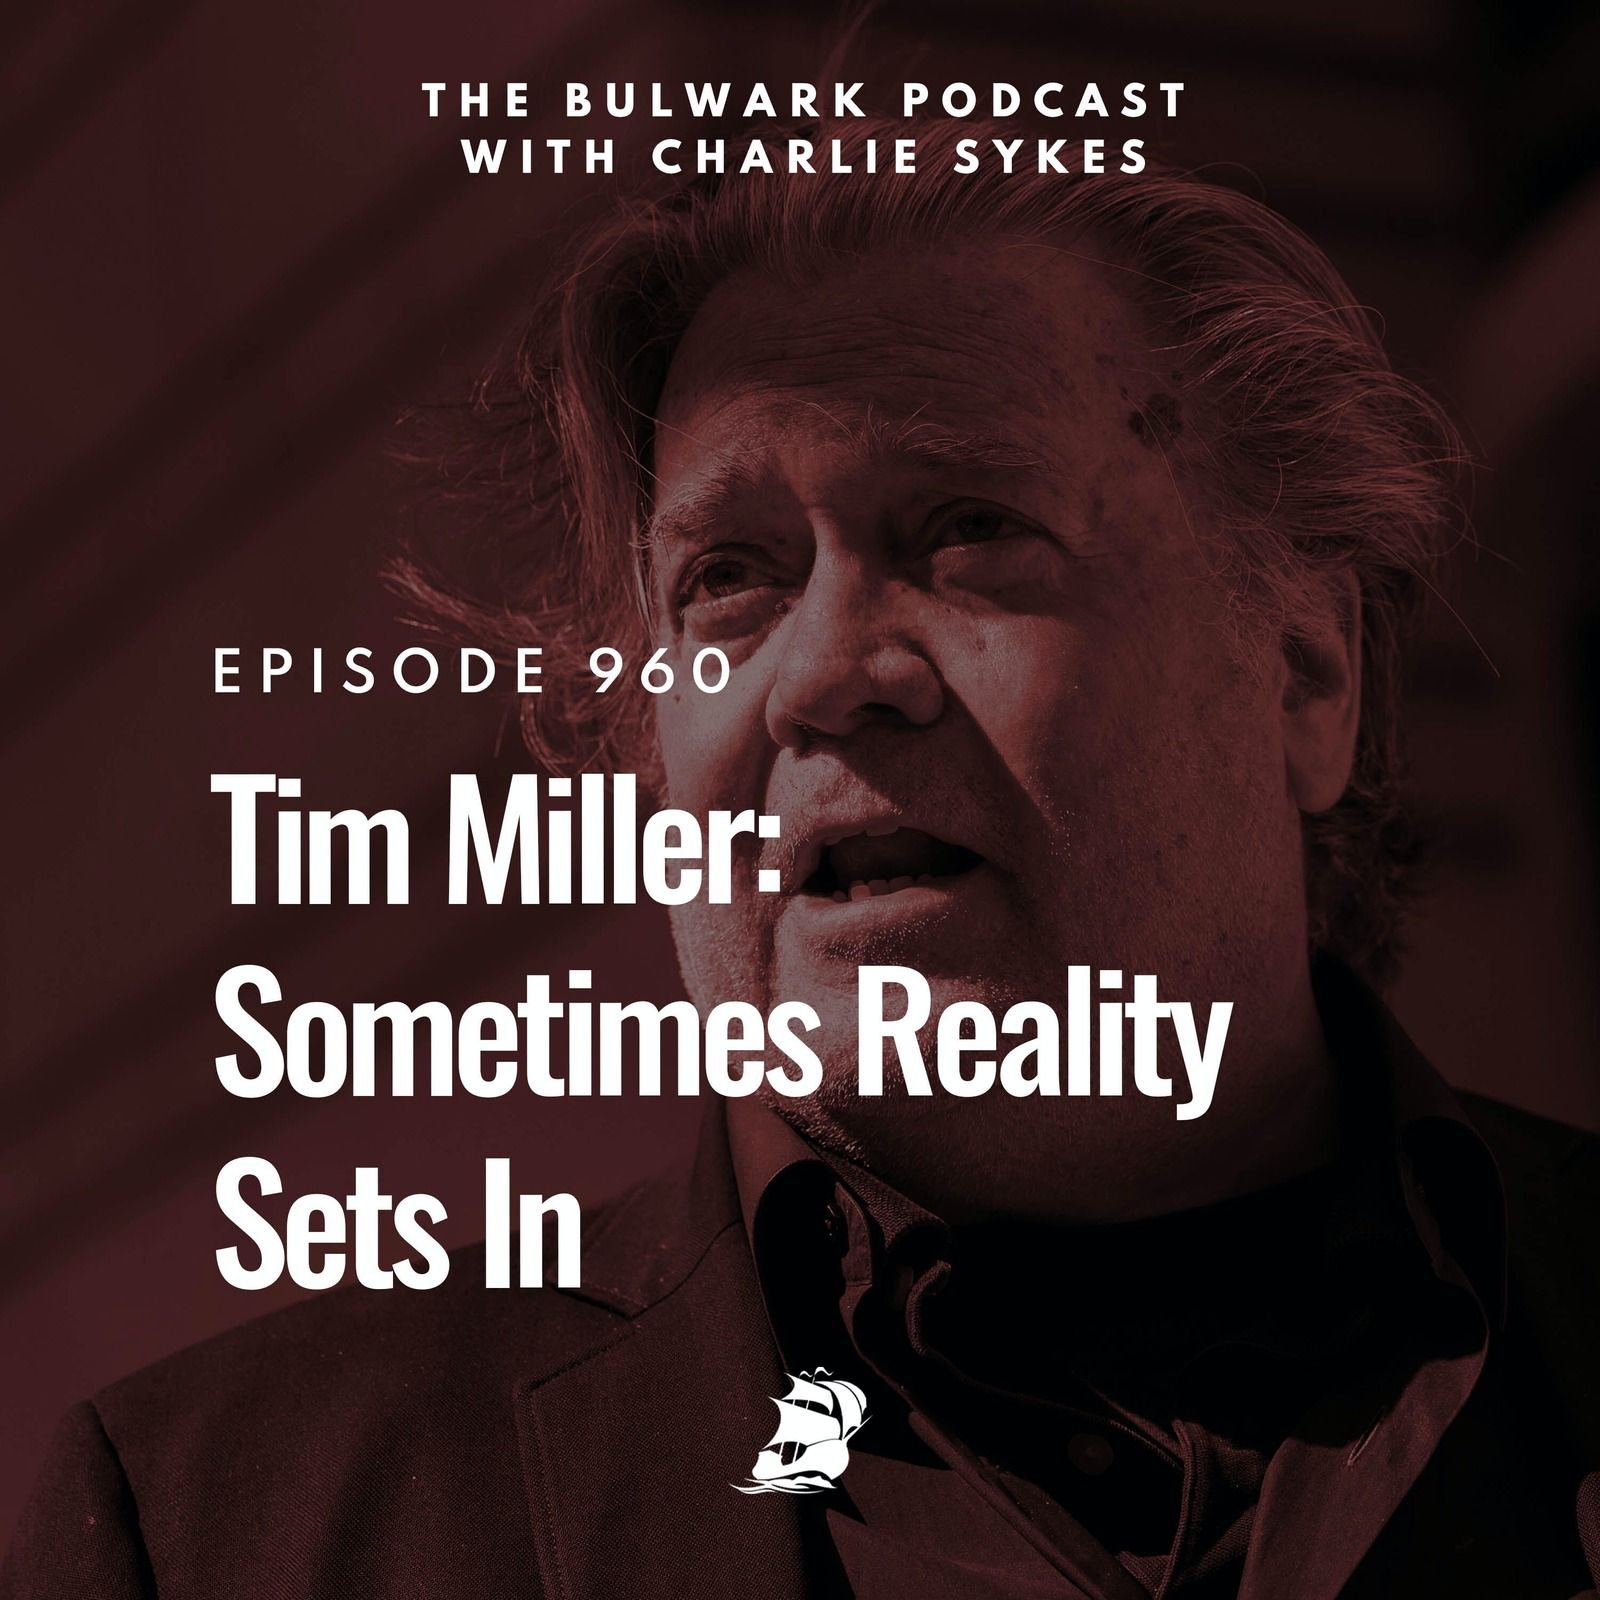 Tim Miller: Sometimes Reality Sets In